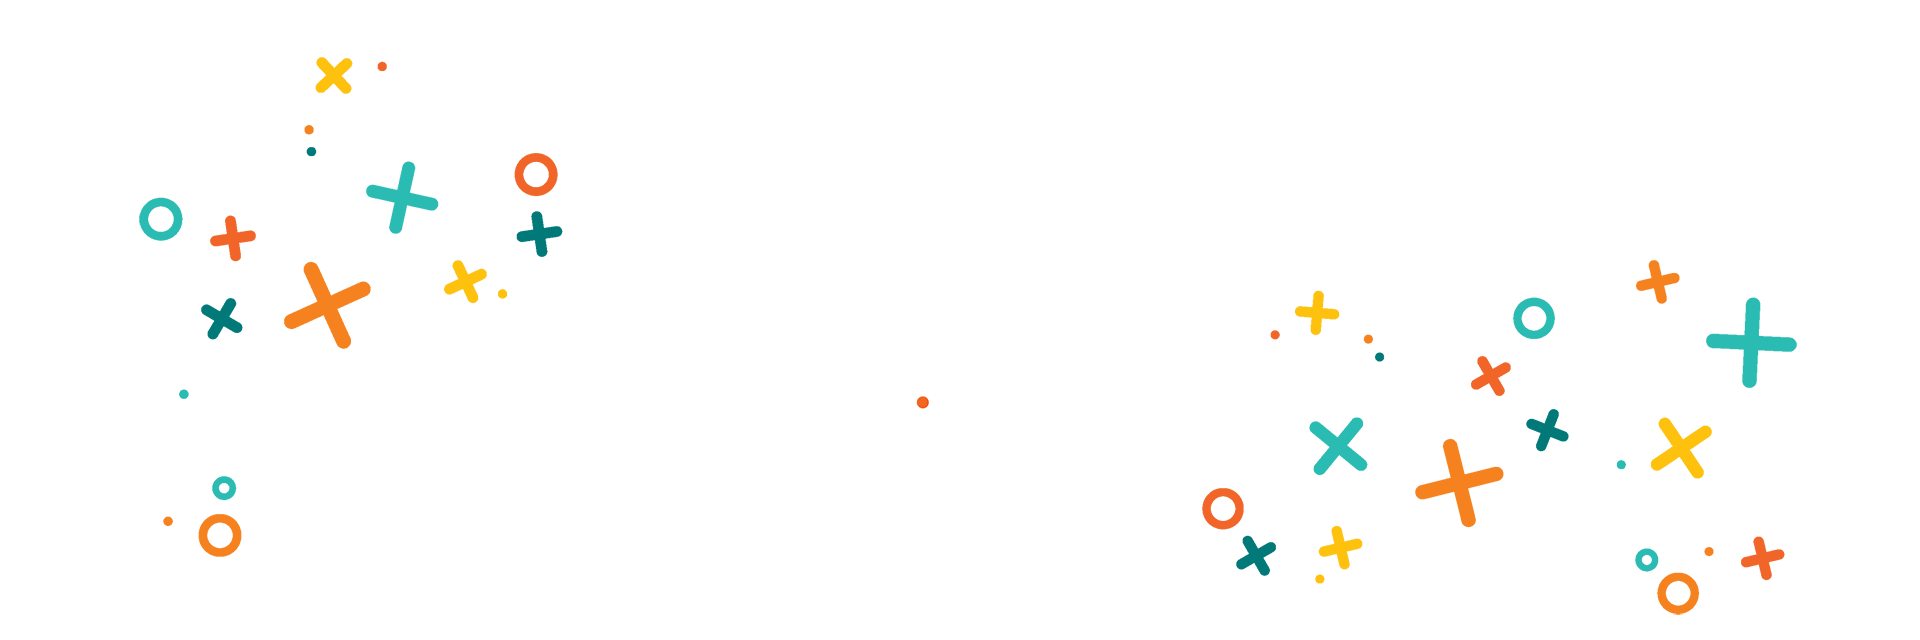 Illustration of hands clapping